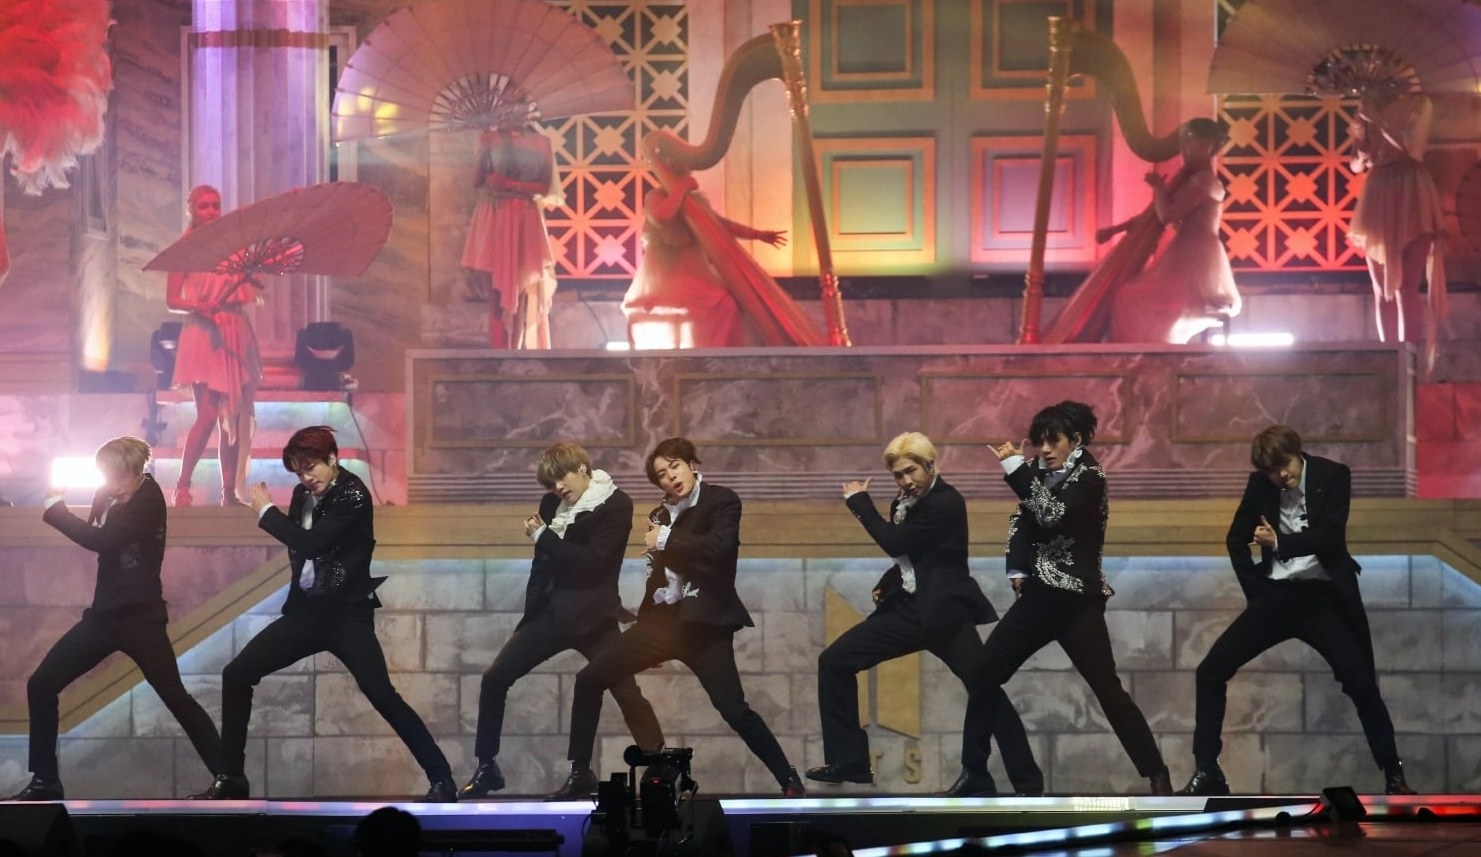 BTS performs in suits on a stage designed to look like a temple